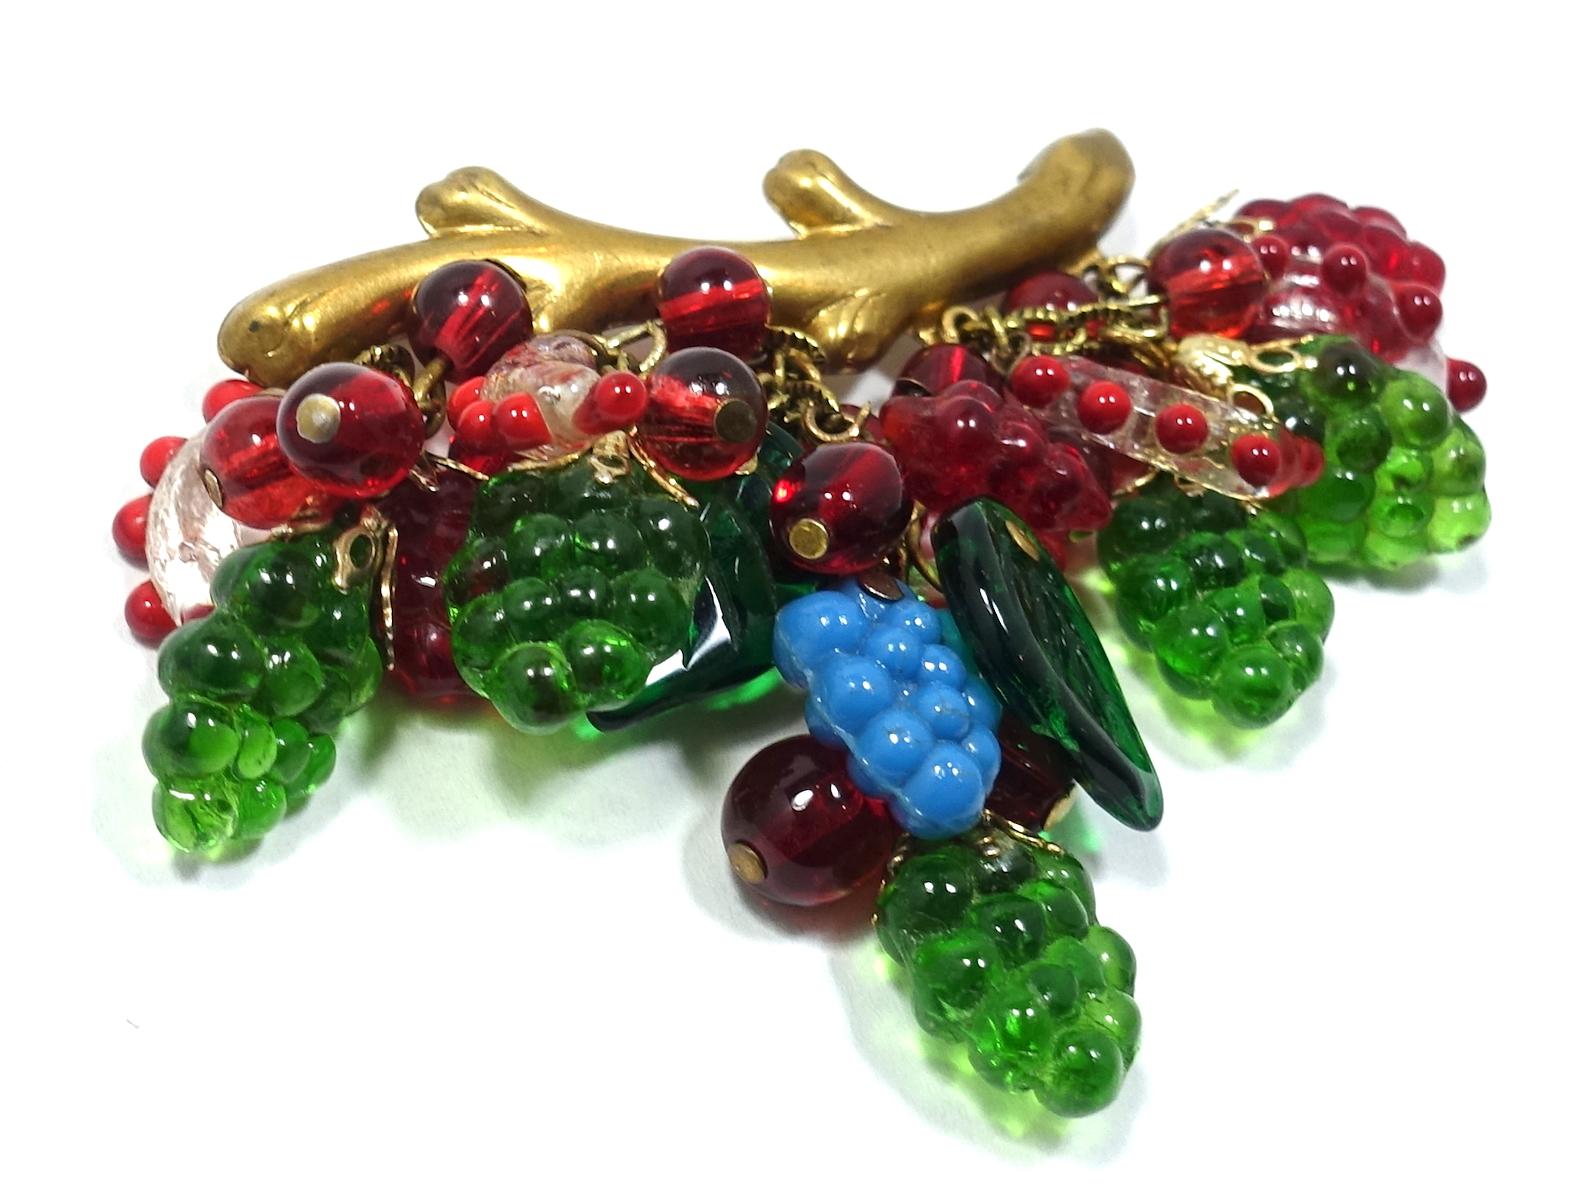 This vintage French Deco 1930s brooch is designed with dangling glass grapes, leaves and multi-color glass berries hanging from a gold tone metal branch.  This brooch measures 2-1/2” x 2-1/4” with a c-pin clasp and is in excellent condition.  